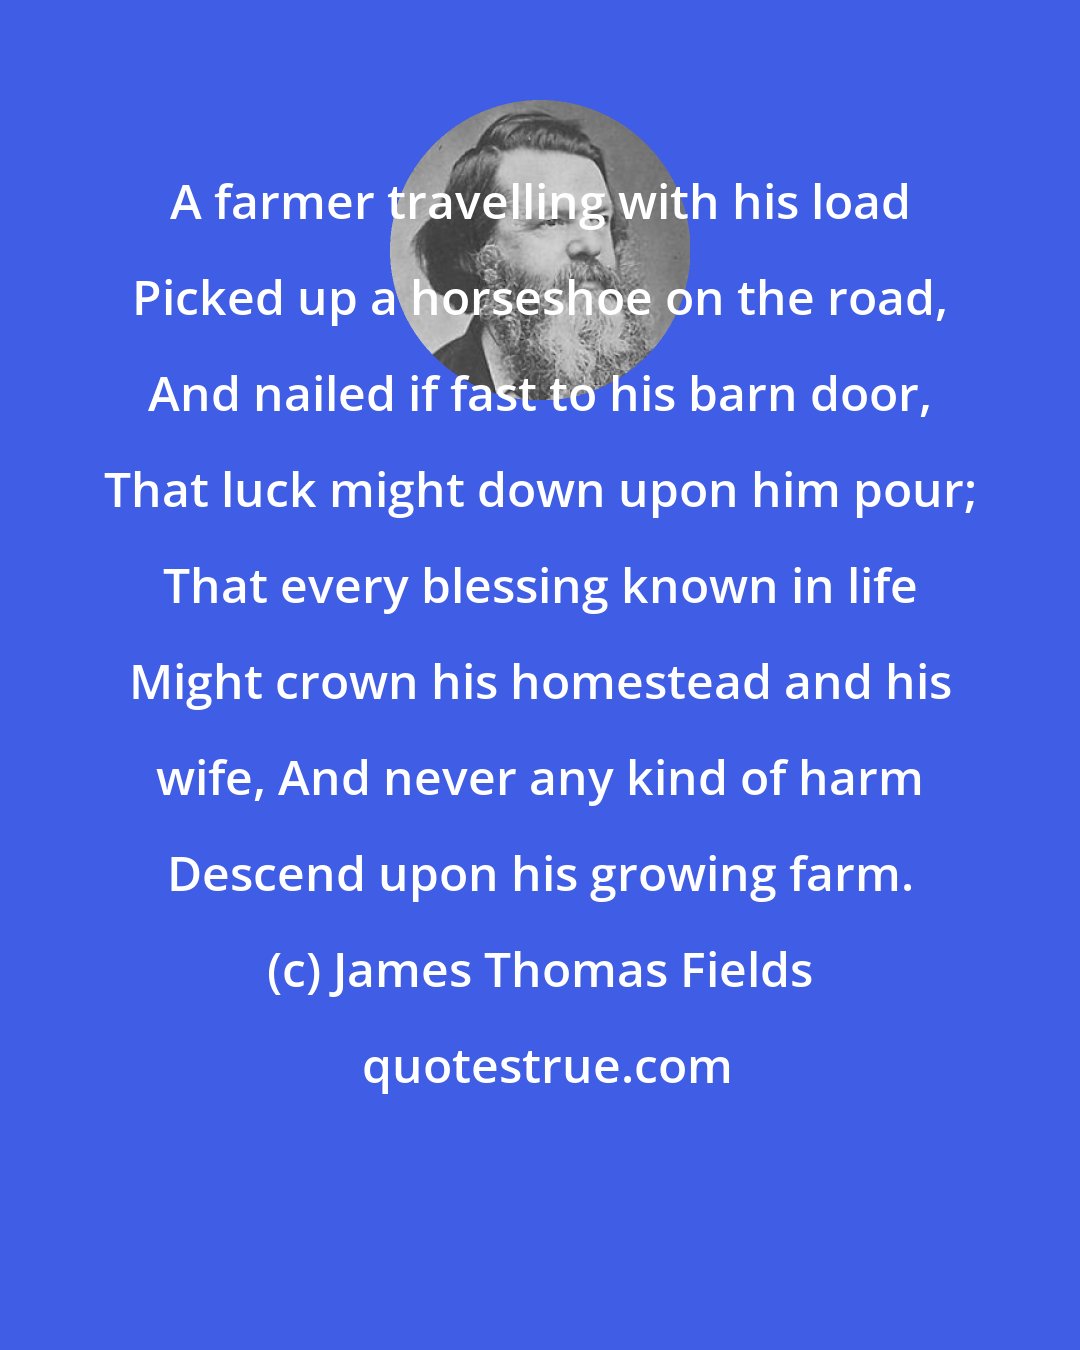 James Thomas Fields: A farmer travelling with his load Picked up a horseshoe on the road, And nailed if fast to his barn door, That luck might down upon him pour; That every blessing known in life Might crown his homestead and his wife, And never any kind of harm Descend upon his growing farm.